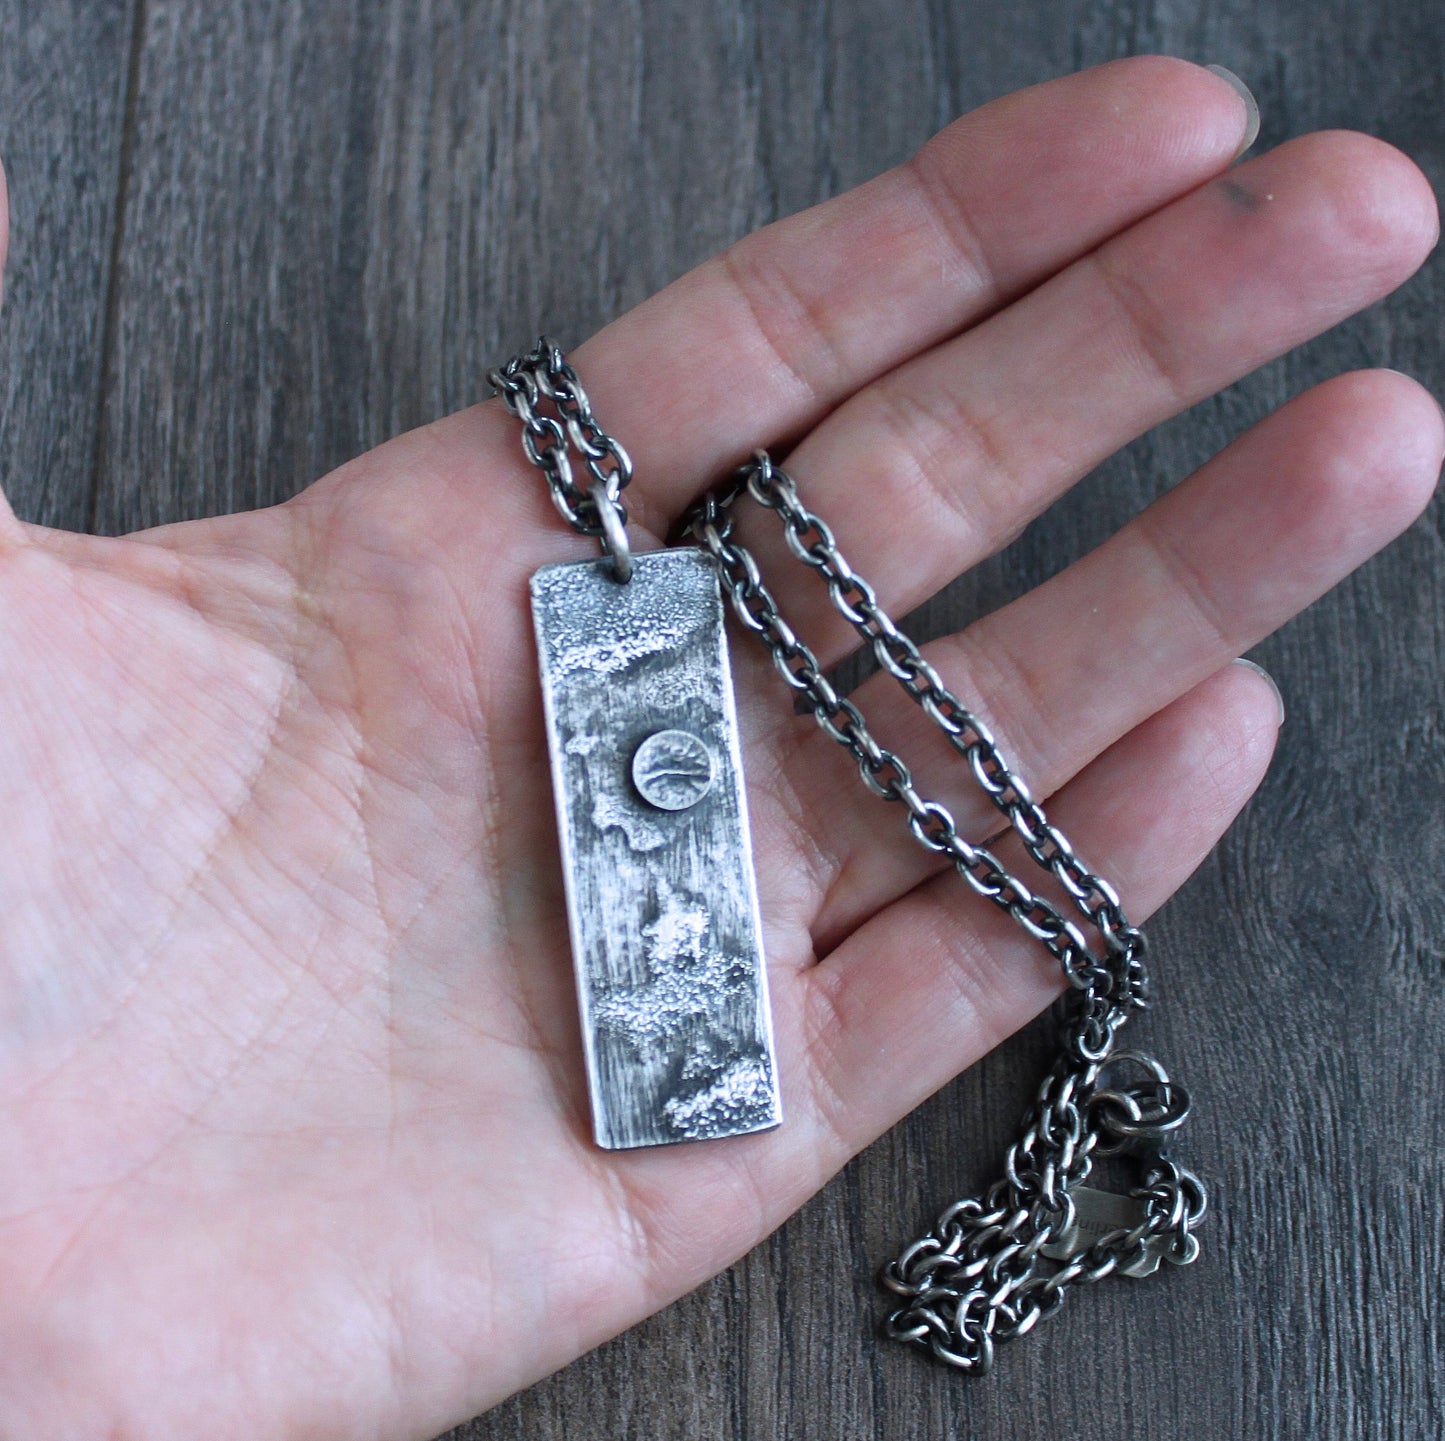 Reticulated Silver "Cosmic" Pendant Necklace